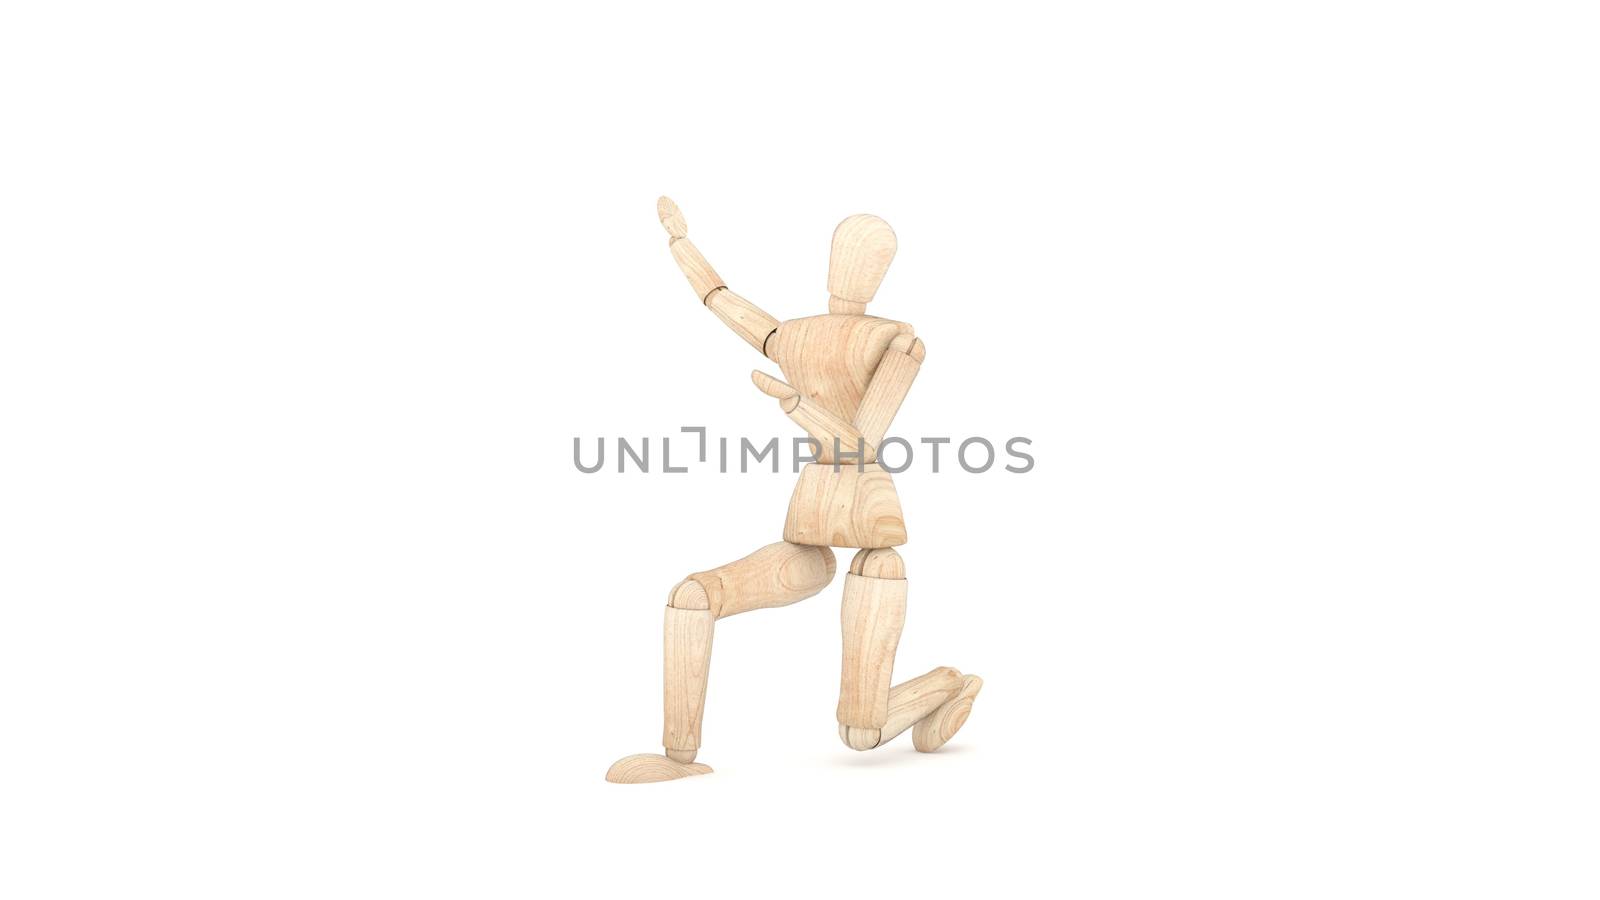 Stand Wooden Dummy. 3D rendering by Minny0012011@hotmail.com